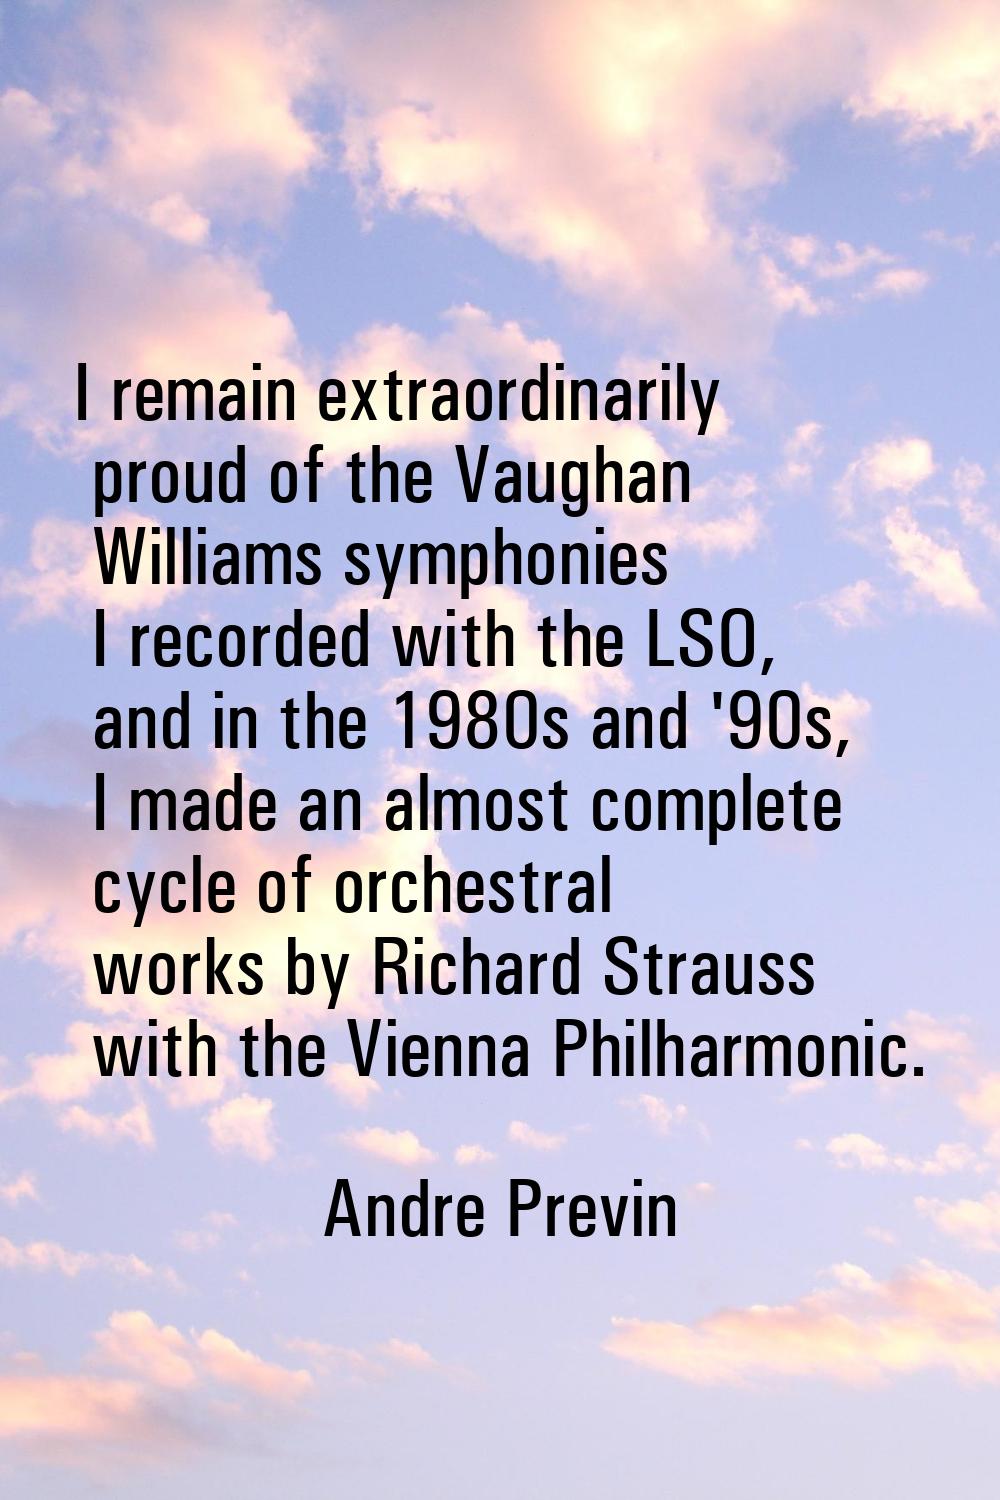 I remain extraordinarily proud of the Vaughan Williams symphonies I recorded with the LSO, and in t